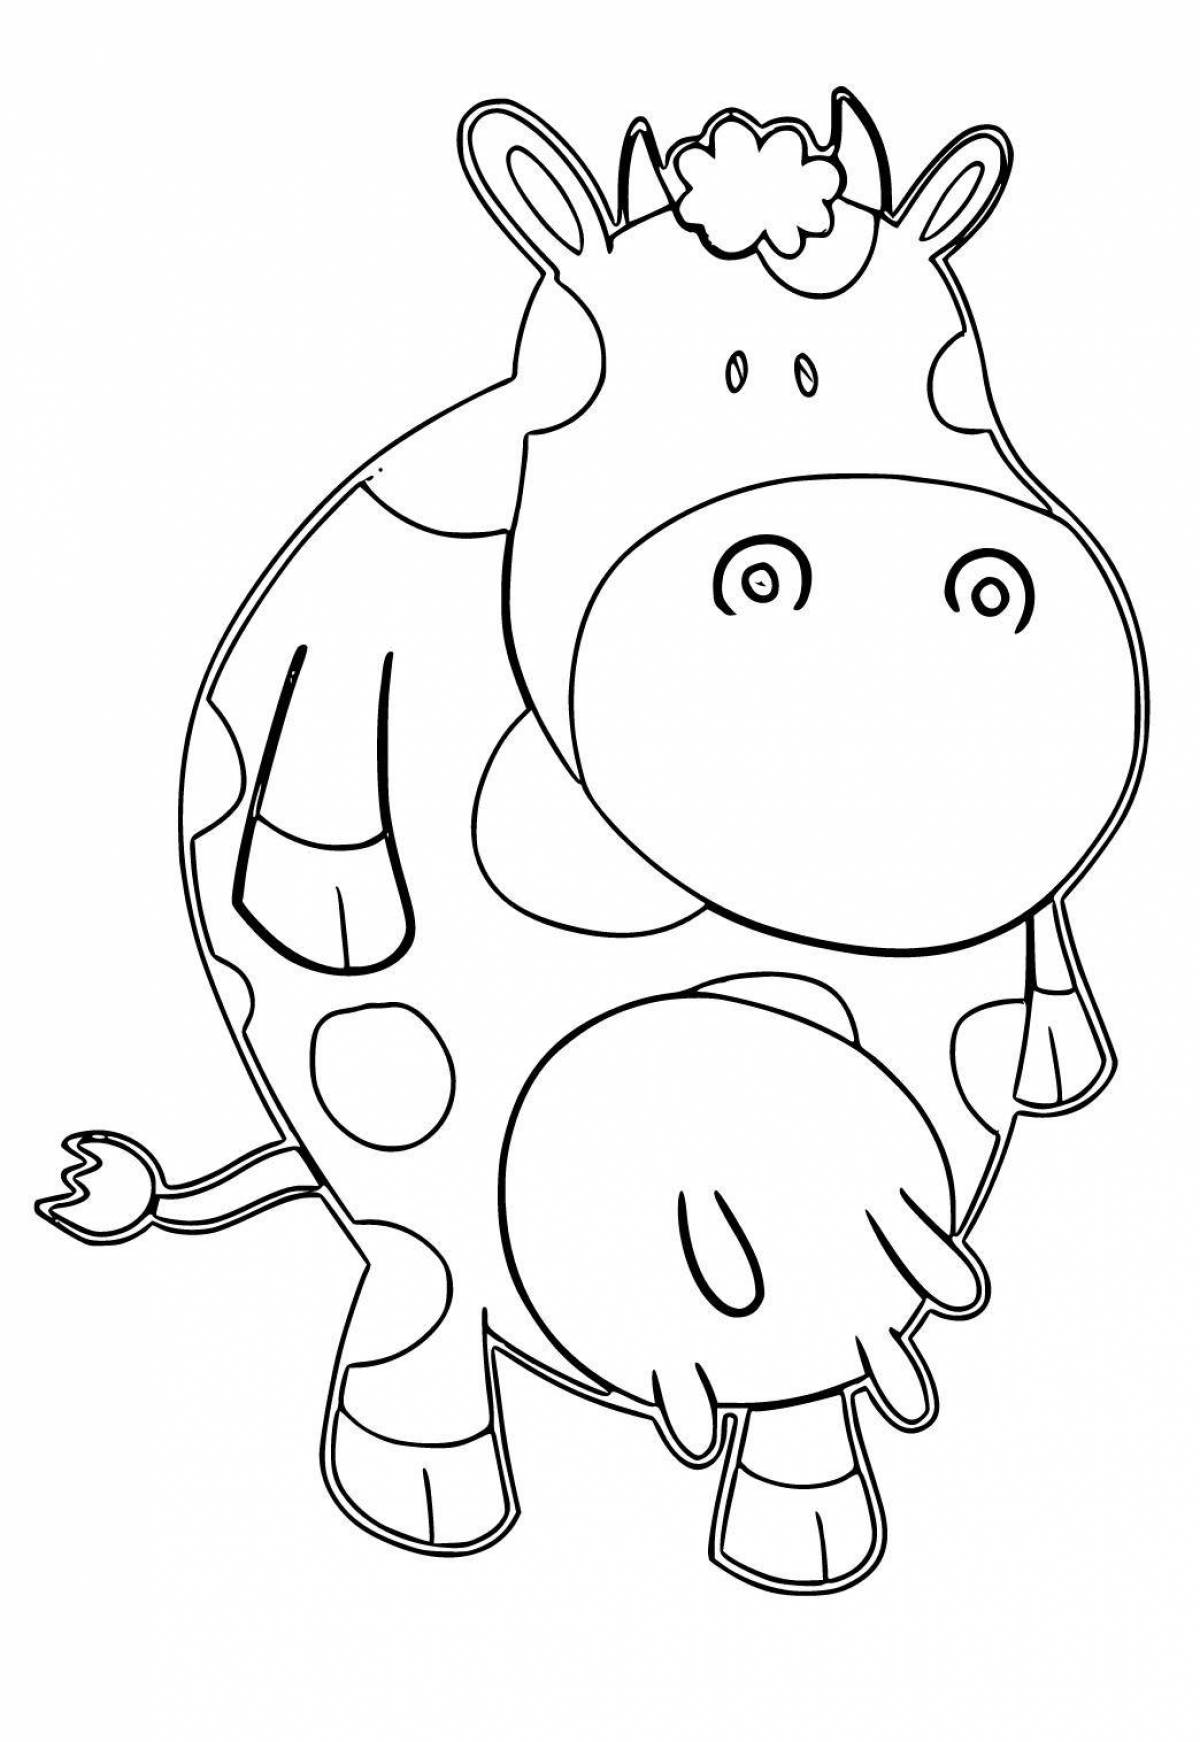 Coloring page humorous cow head